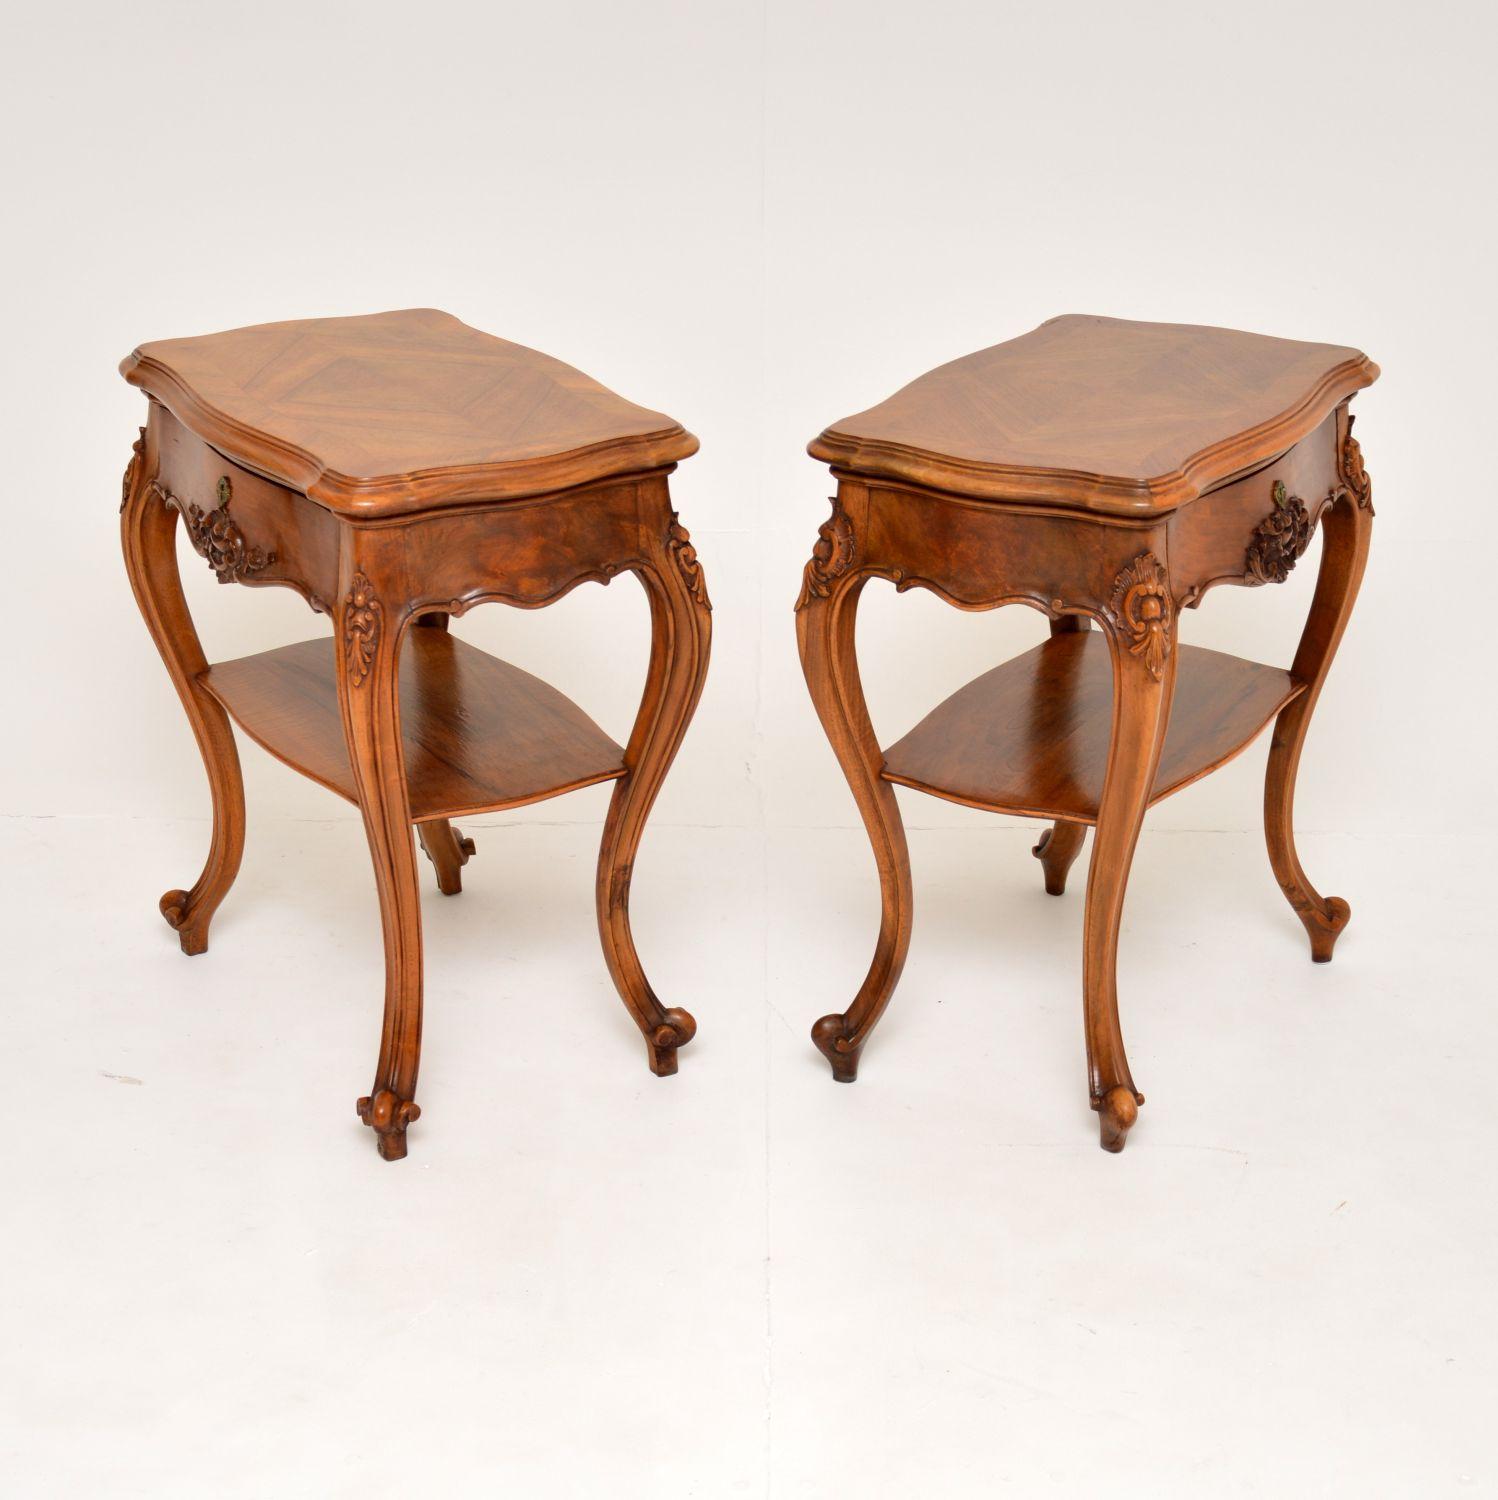 19th Century Pair of Antique French Walnut Side or Bedside Tables